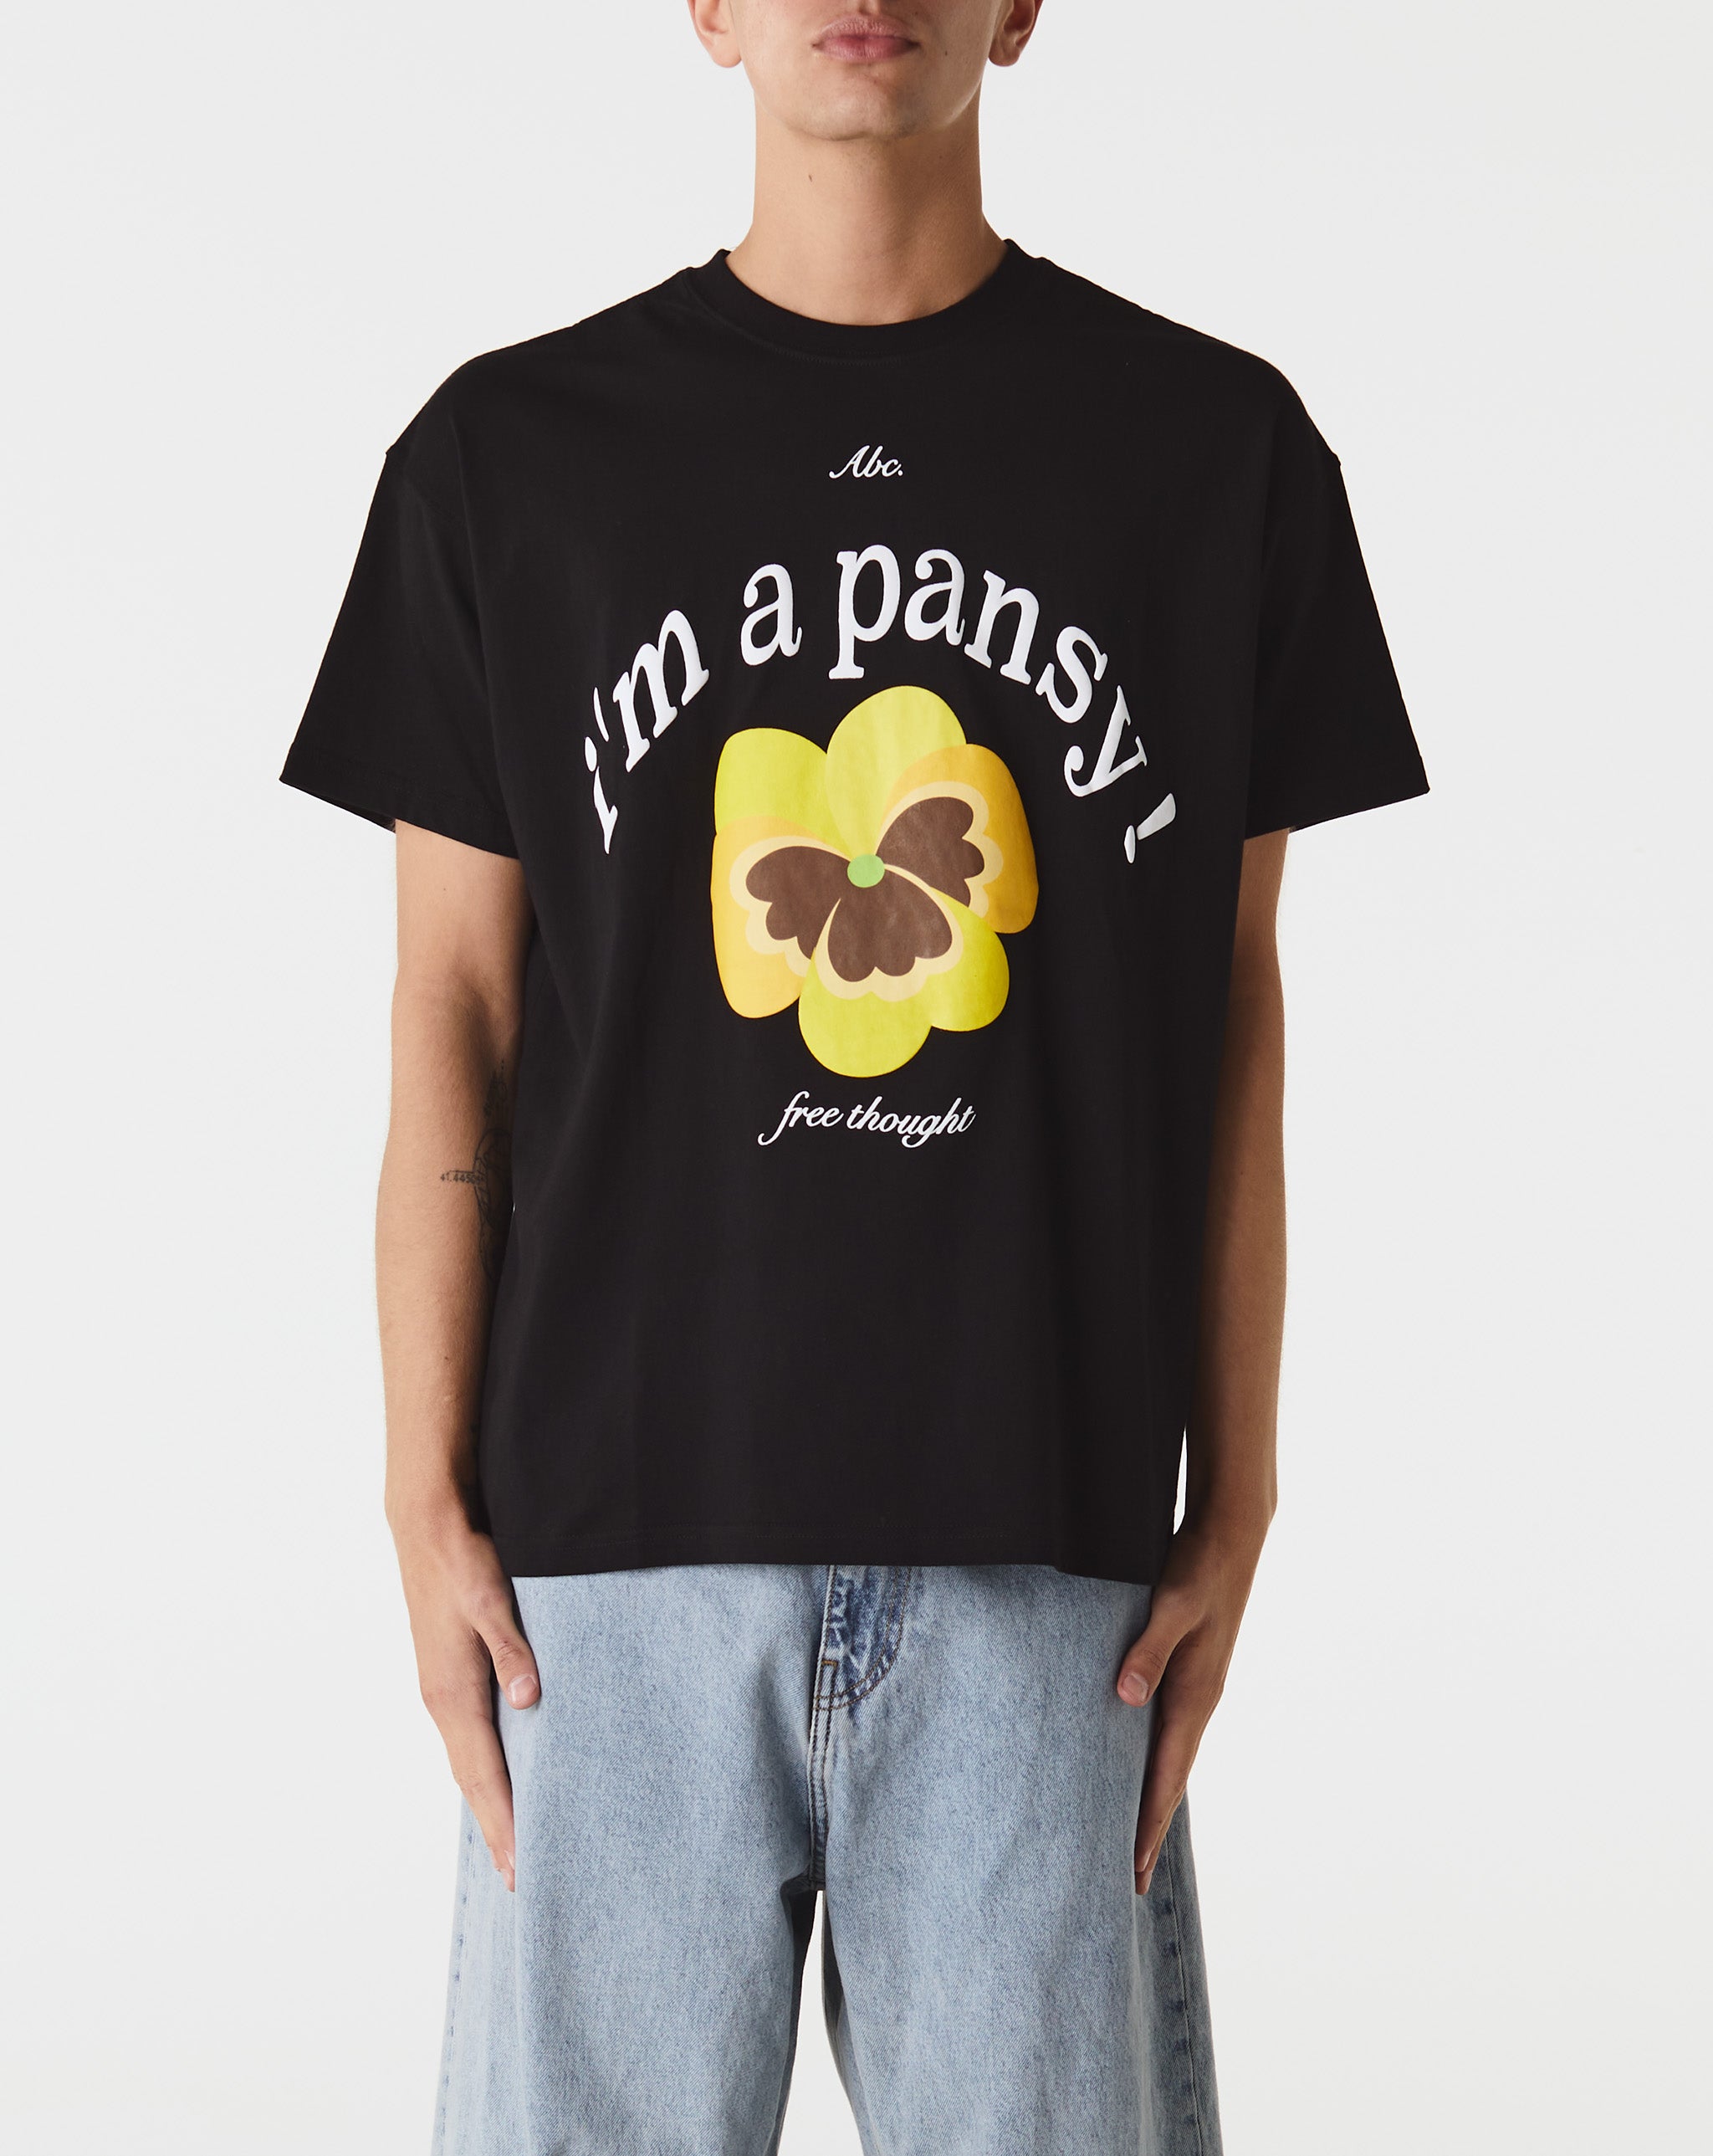 I agree with the Pansy T-Shirt  - Cheap Urlfreeze Jordan outlet